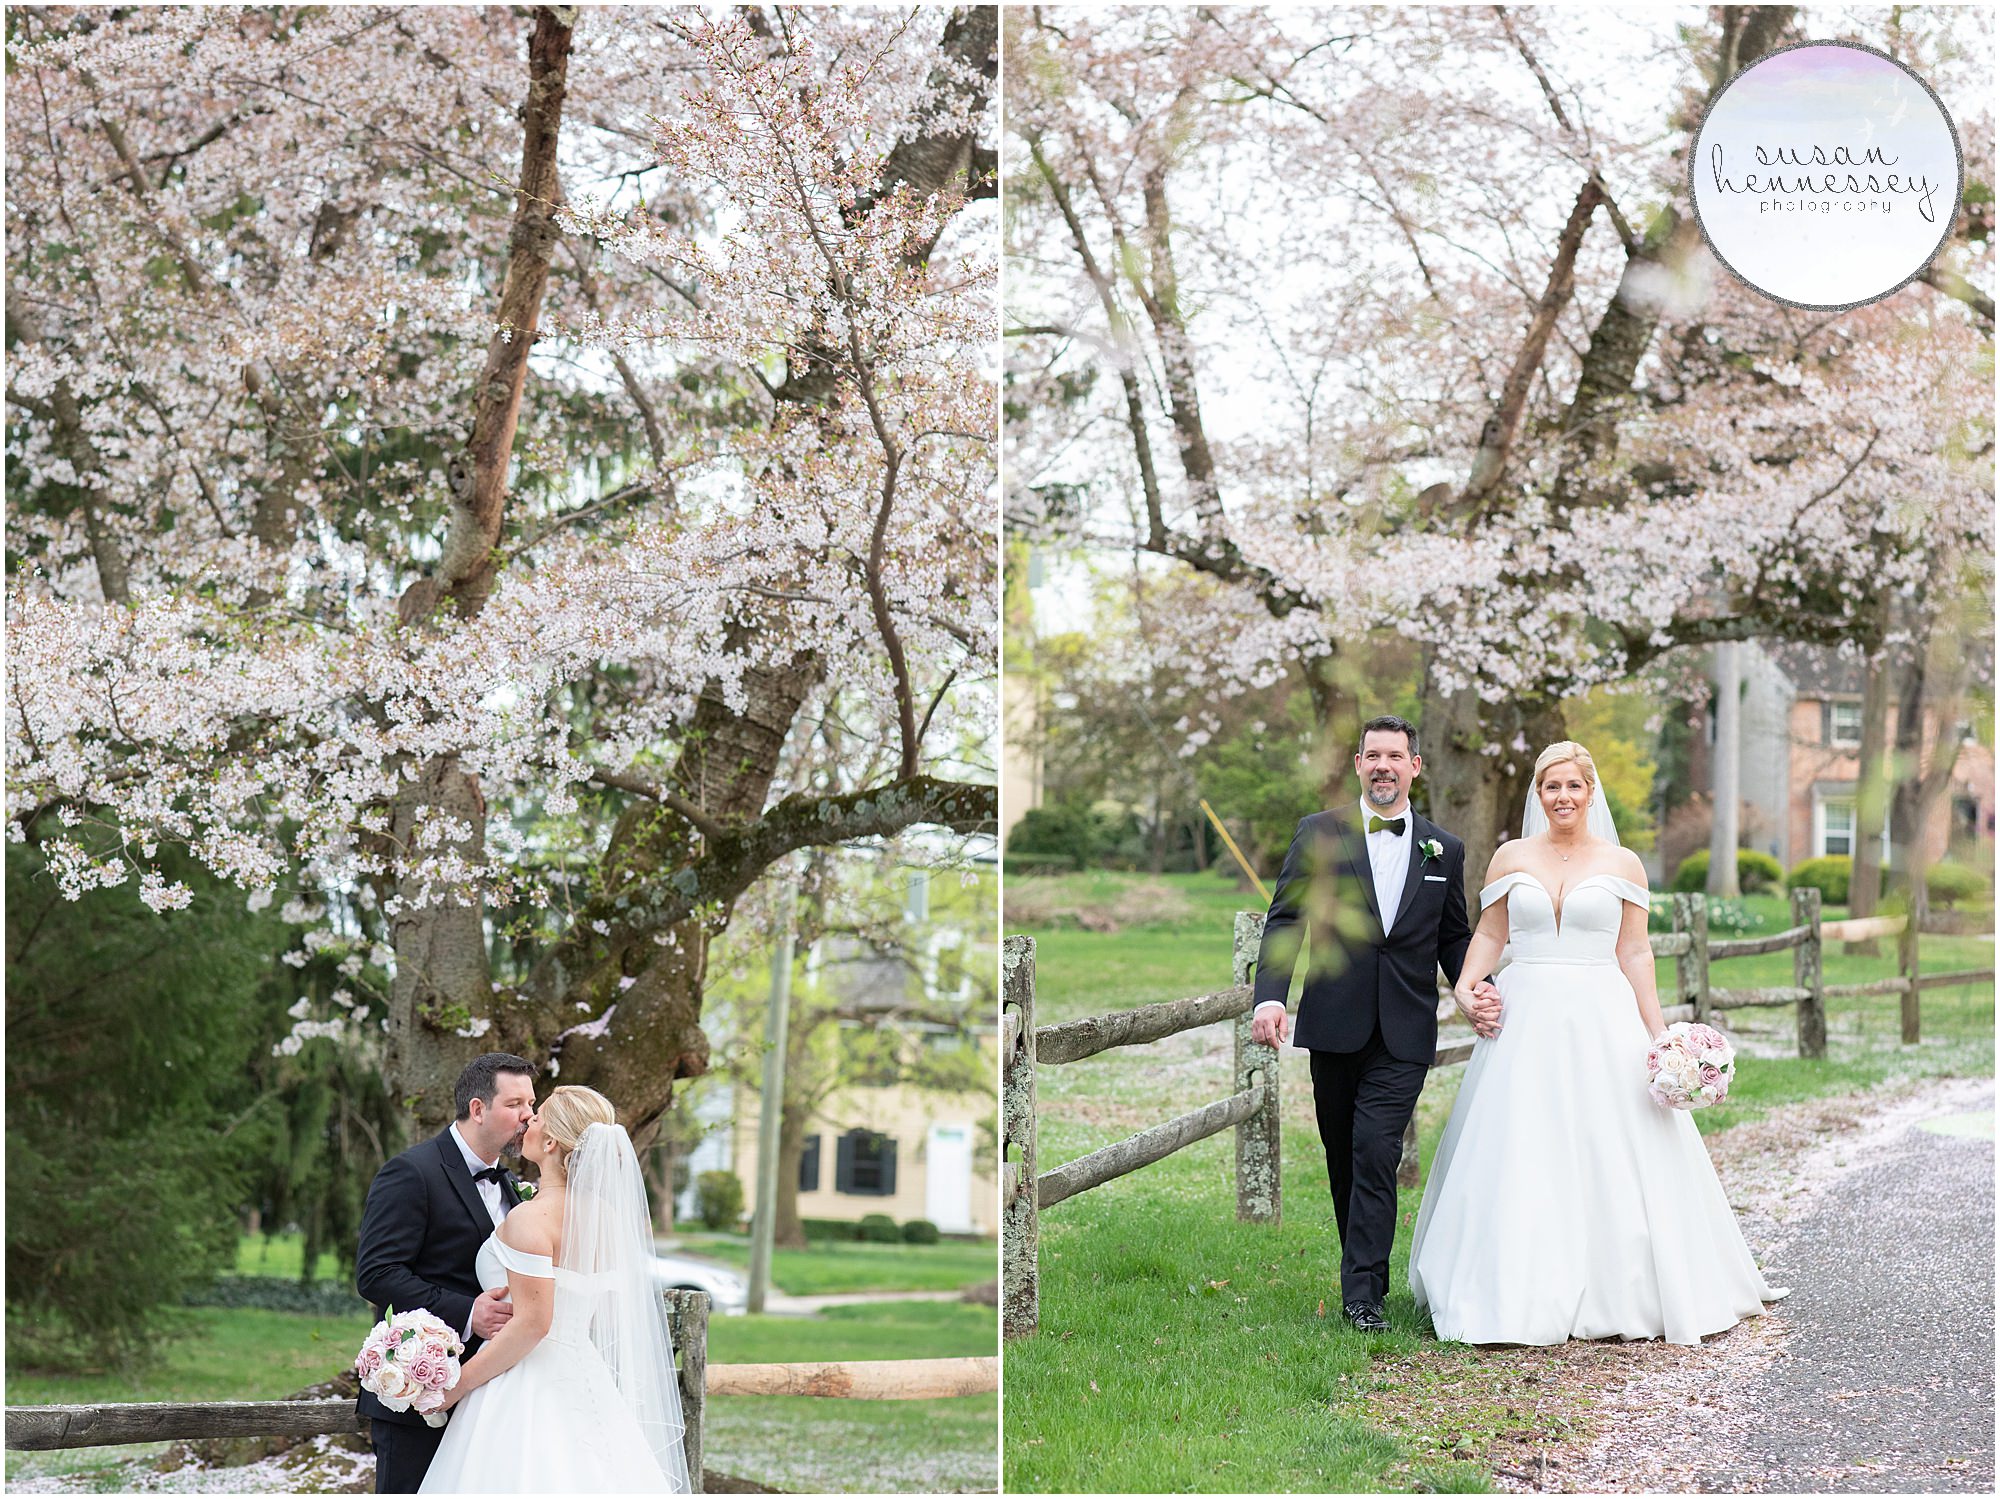 Planning a Micro Wedding? Cherry Blossom season is the best season to get married!